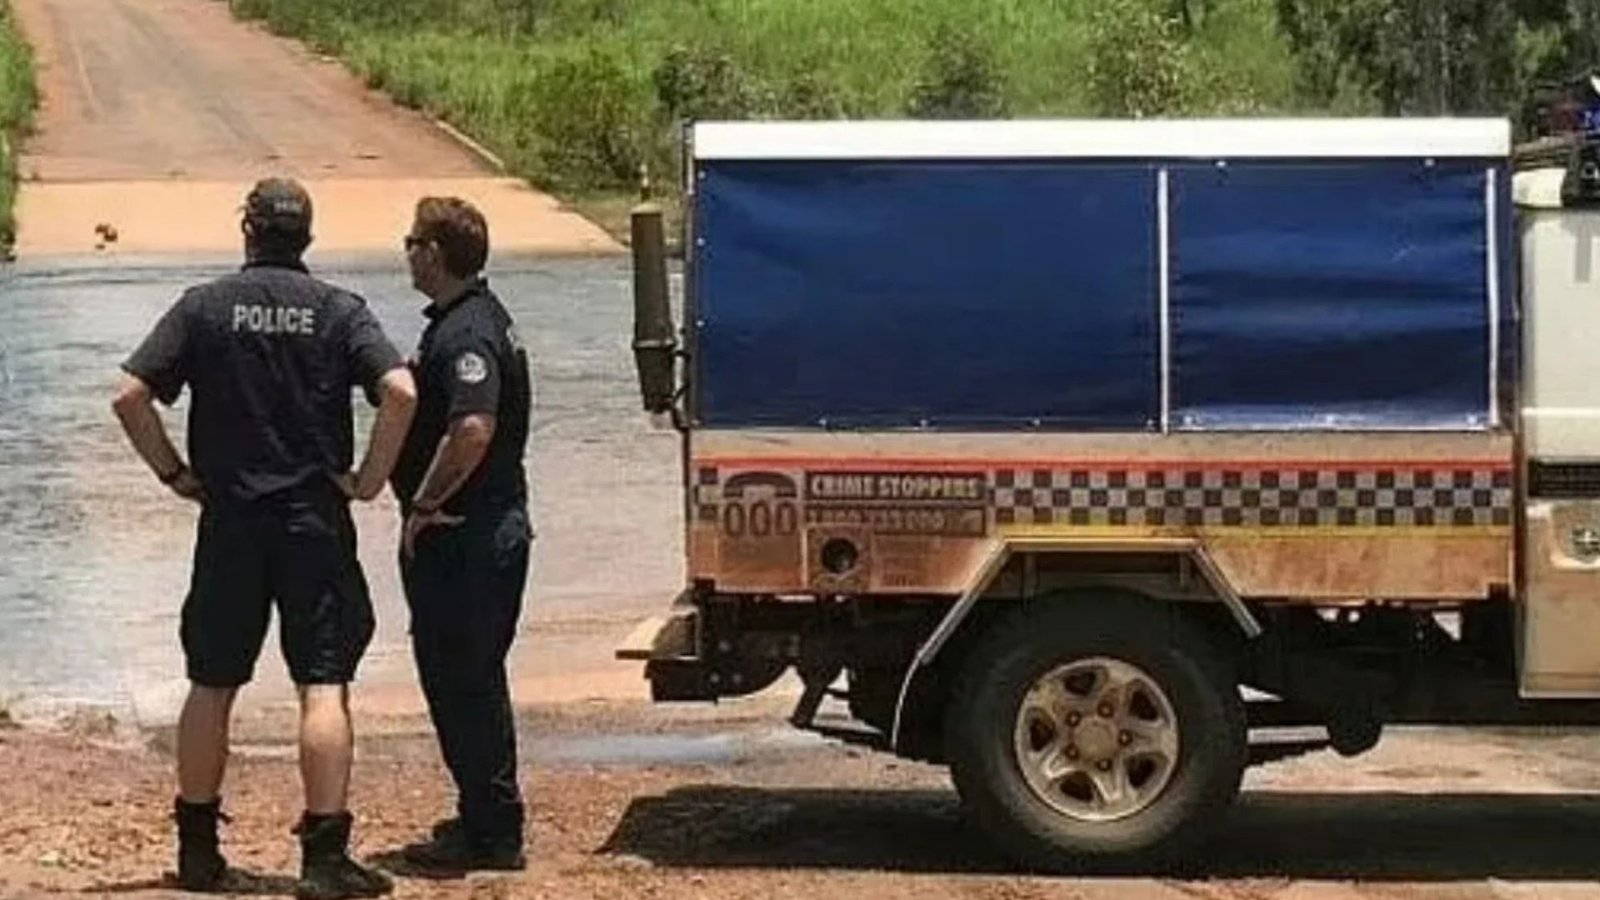 Horror as remains of girl 12 found after being attacked by crocodile while she was swimming in Australia